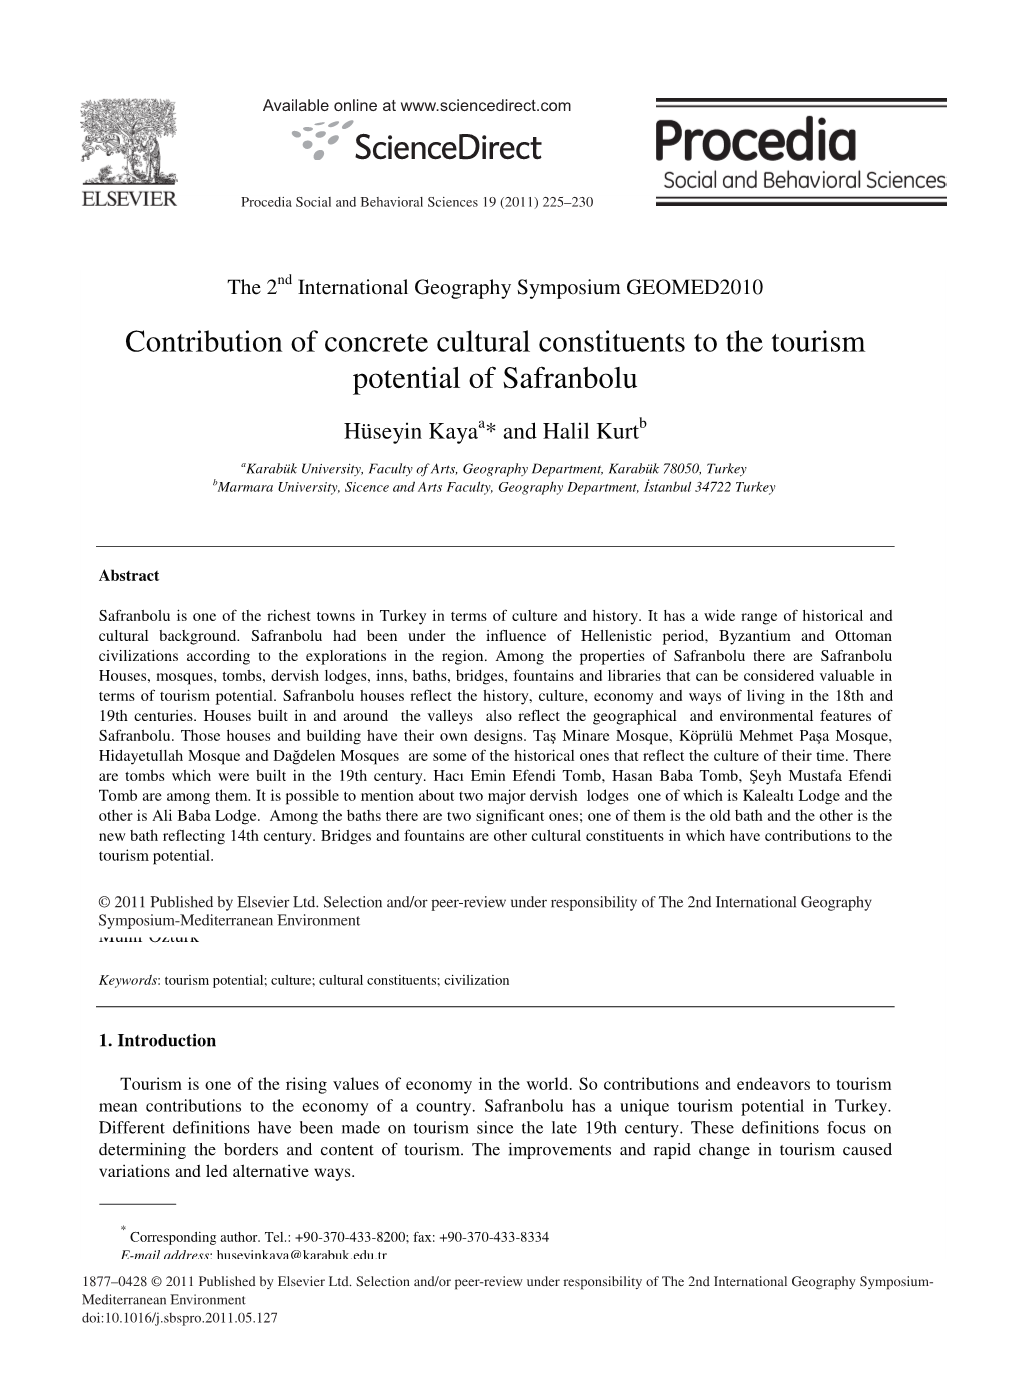 Contribution of Concrete Cultural Constituents to the Tourism Potential of Safranbolu